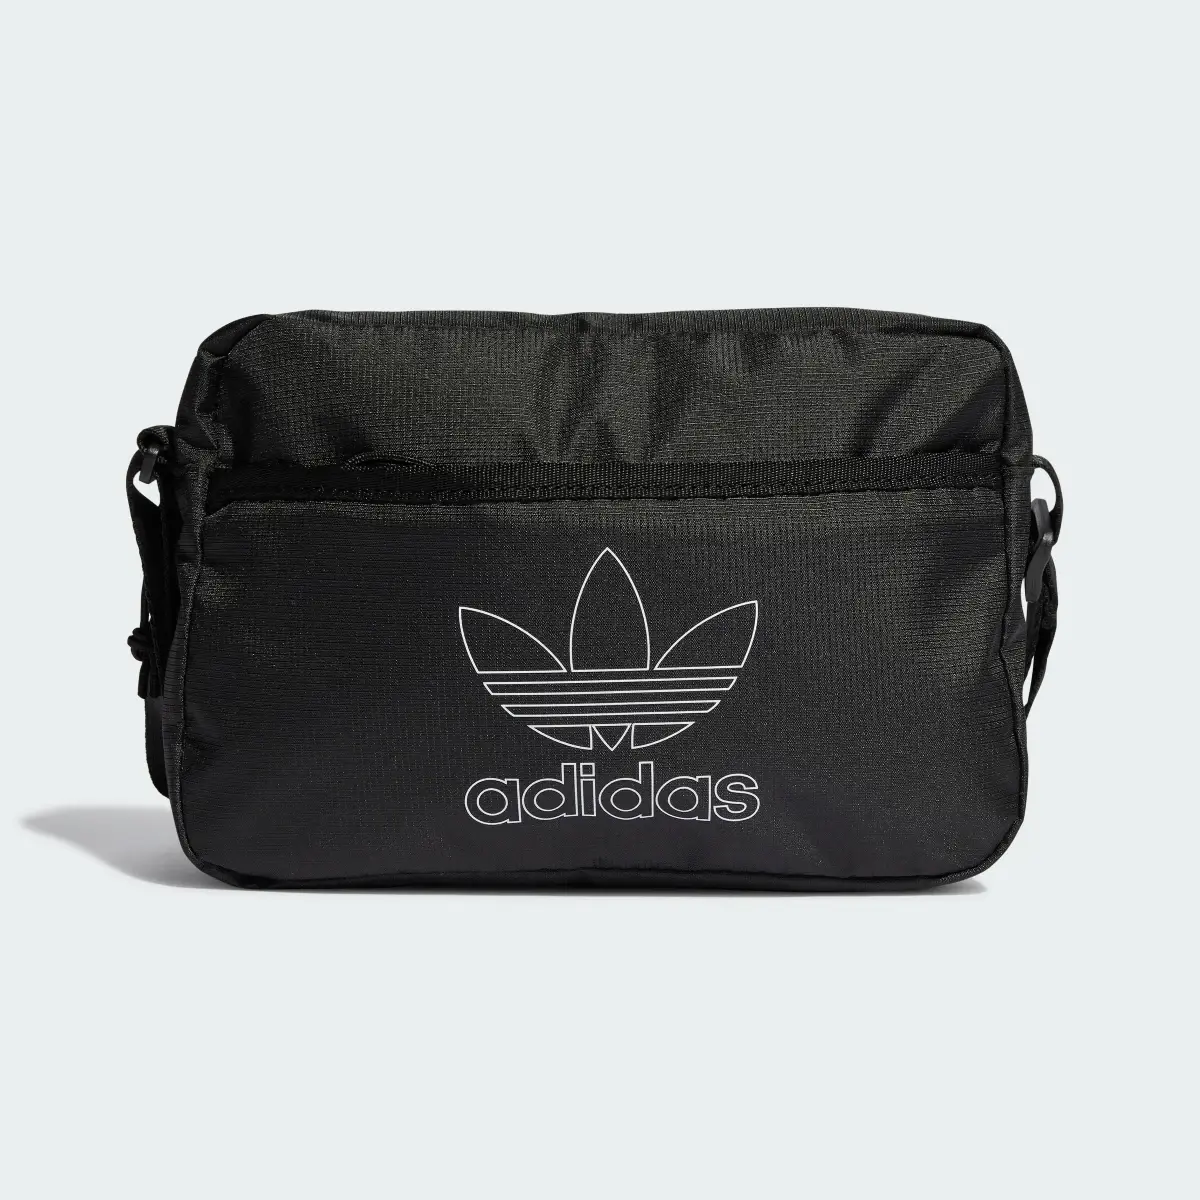 Adidas Bolso Small Airliner. 2